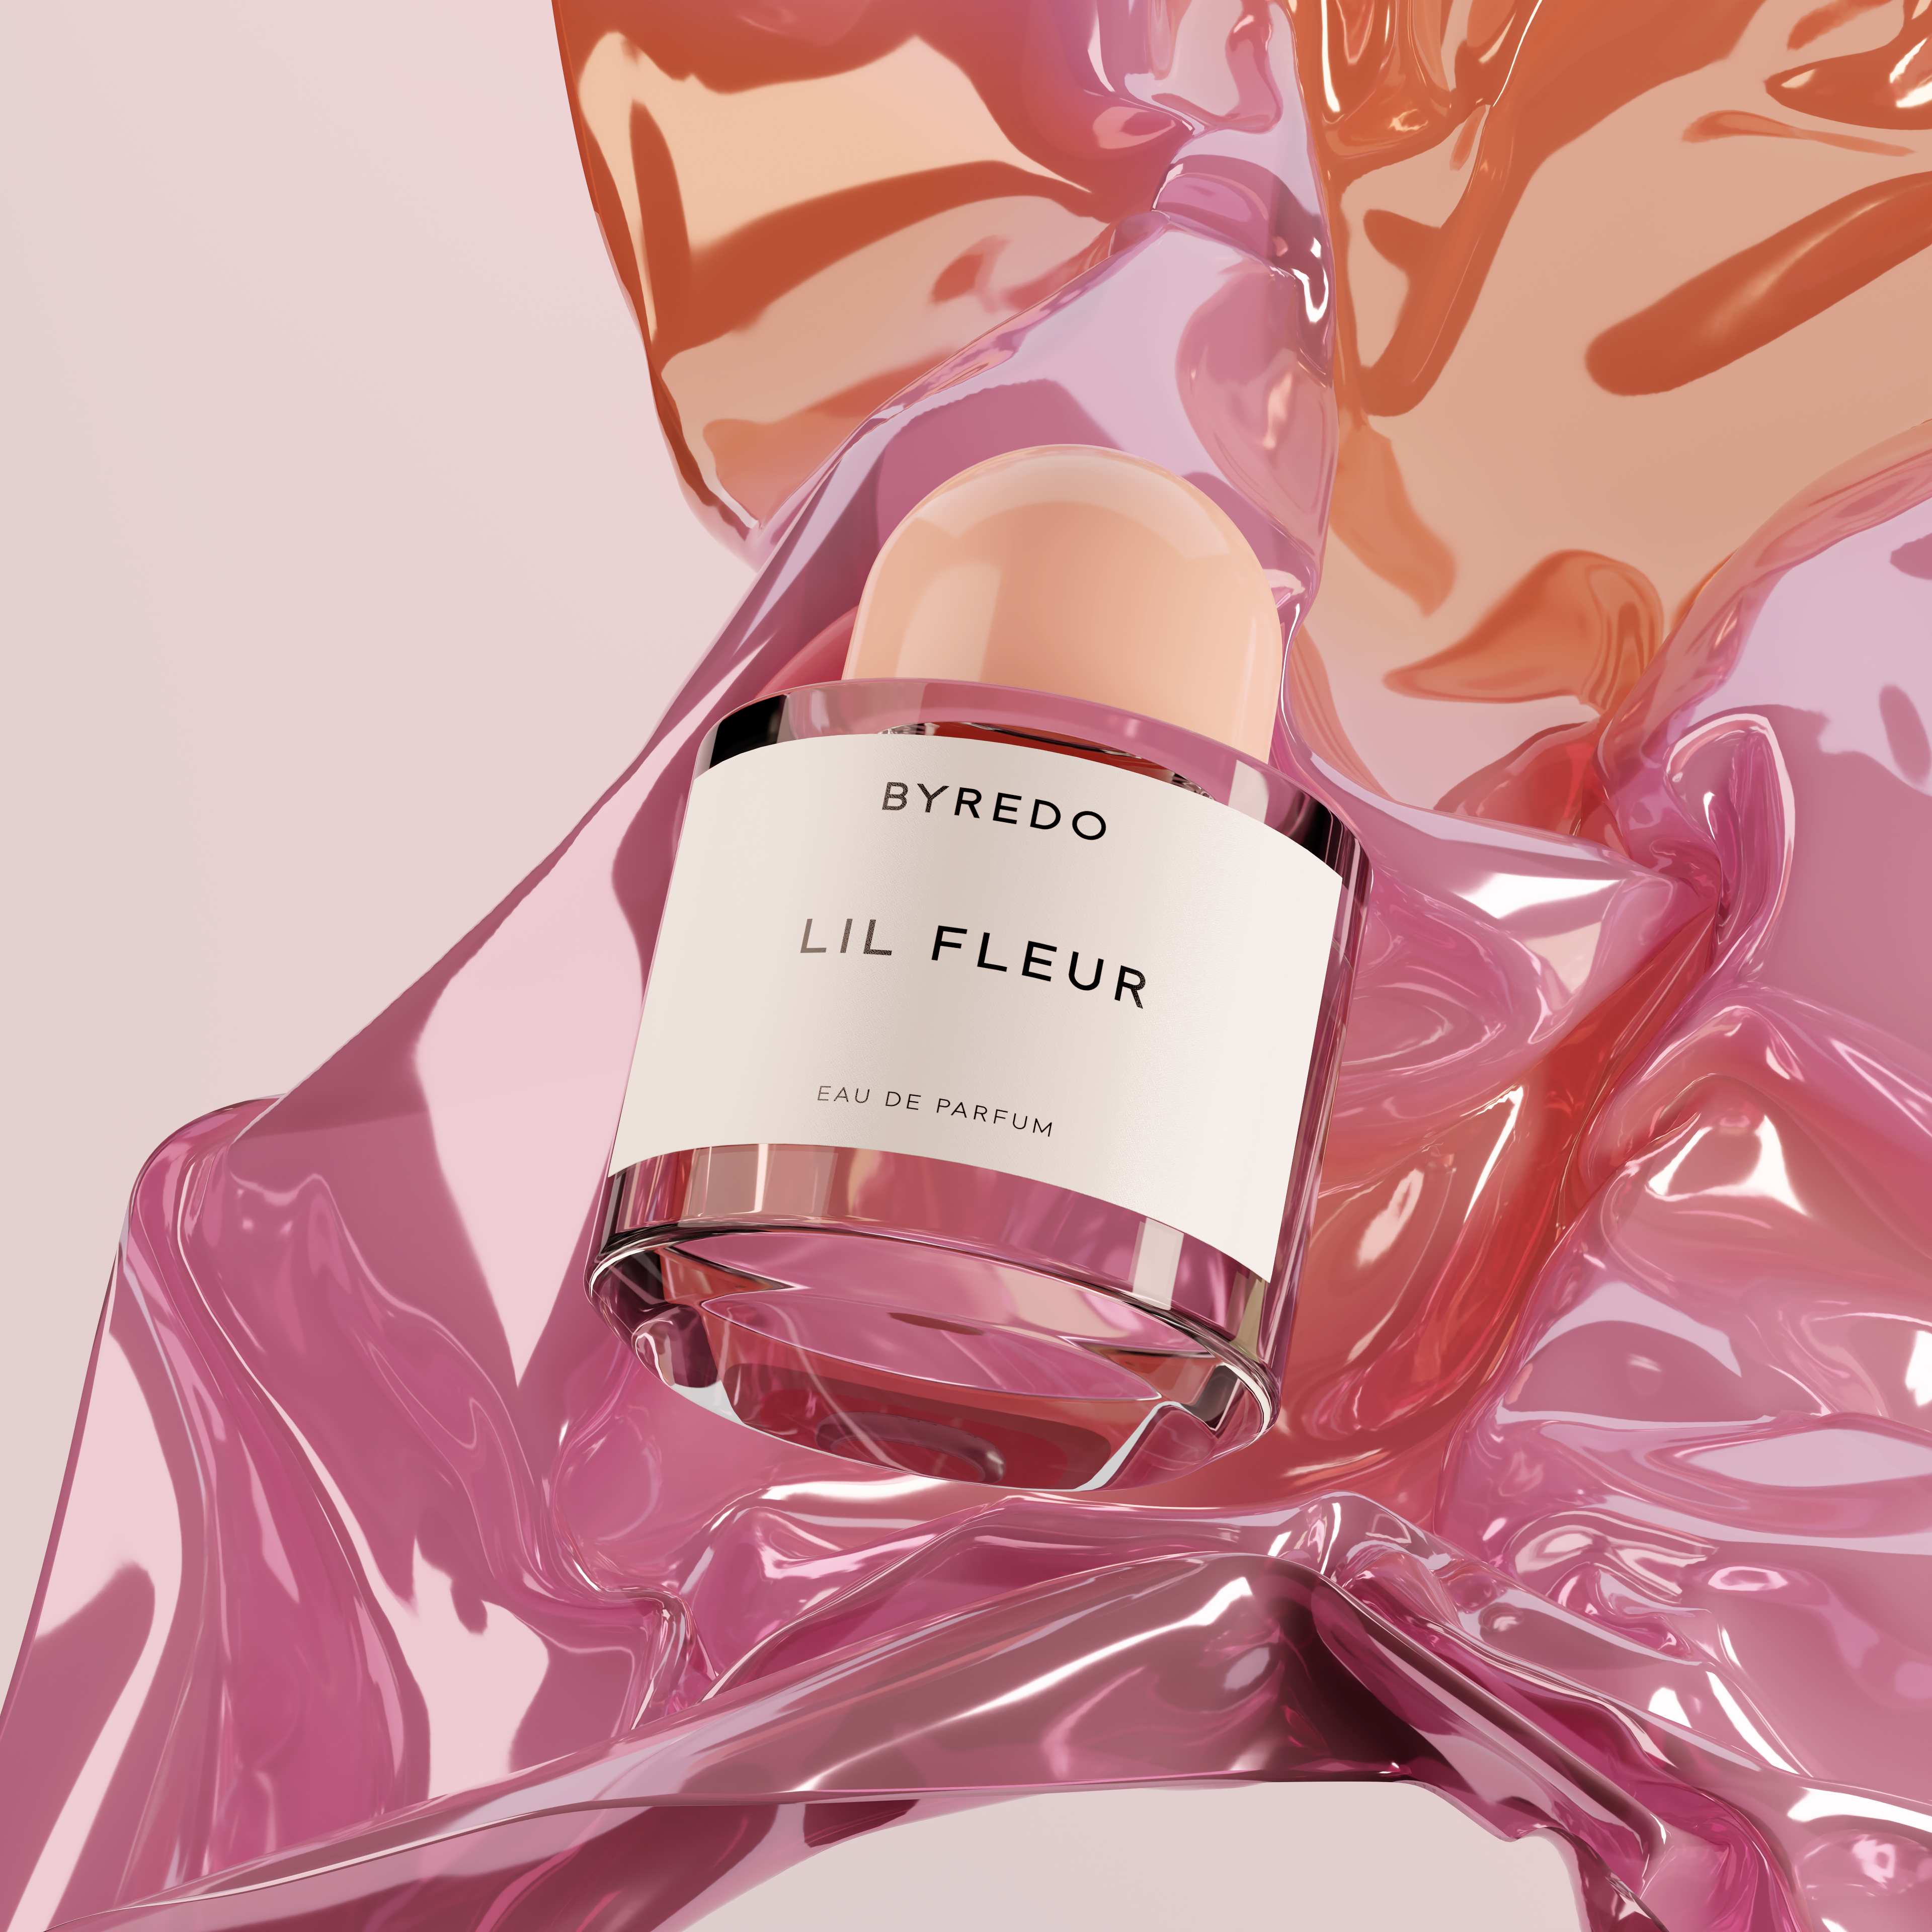 A CG shot of Byredo parfume on abstract wavy background 